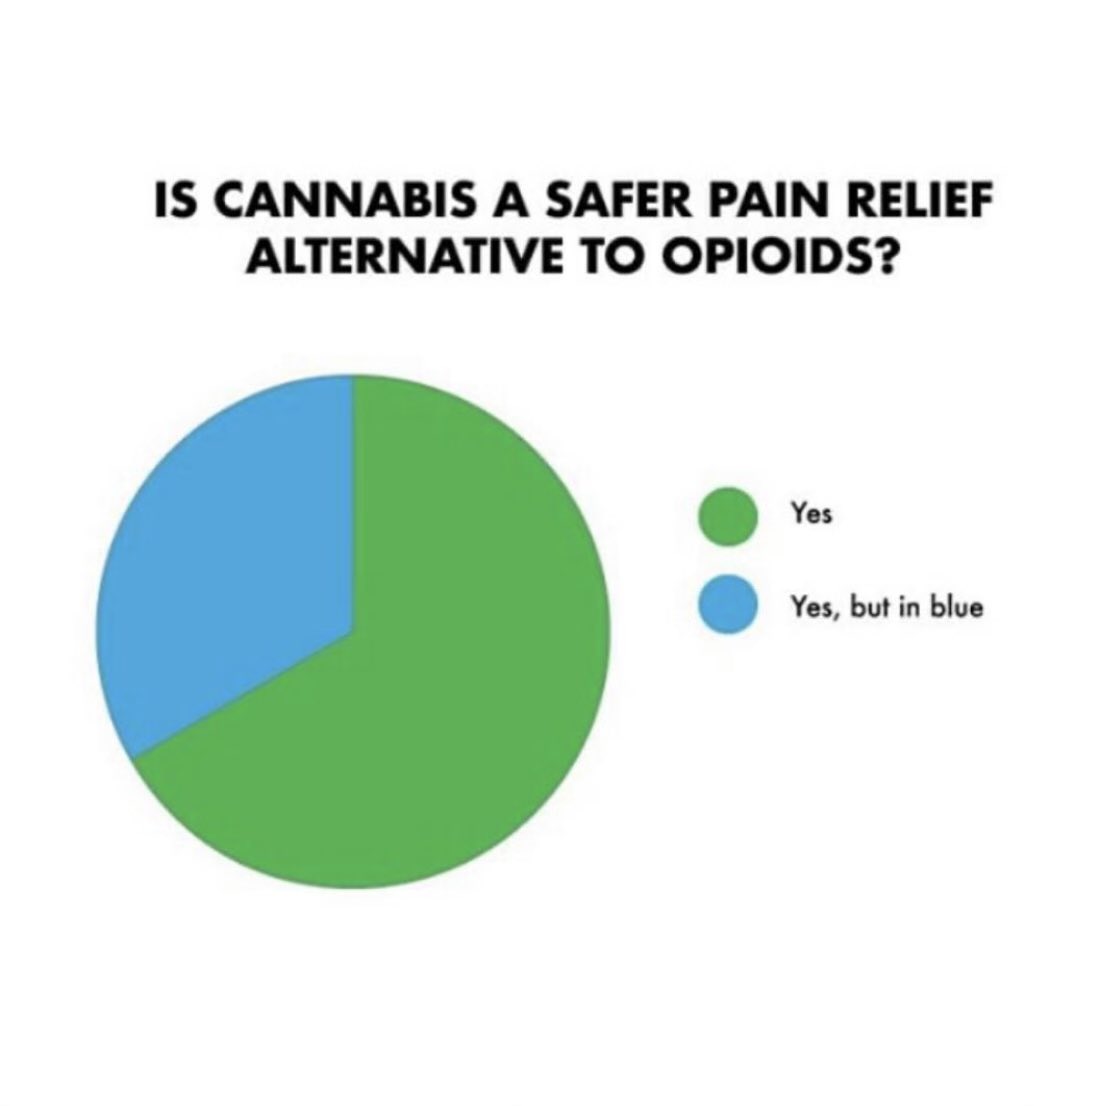 I don’t think it’s even close! We should all have the choice of what to put in our body, especially when we know the alternative is dangerous, so dangerous our government has a whole special board trying to figure out the opioid epidemic…#Cannabis #LegalizeIt #CannabisCommunity…